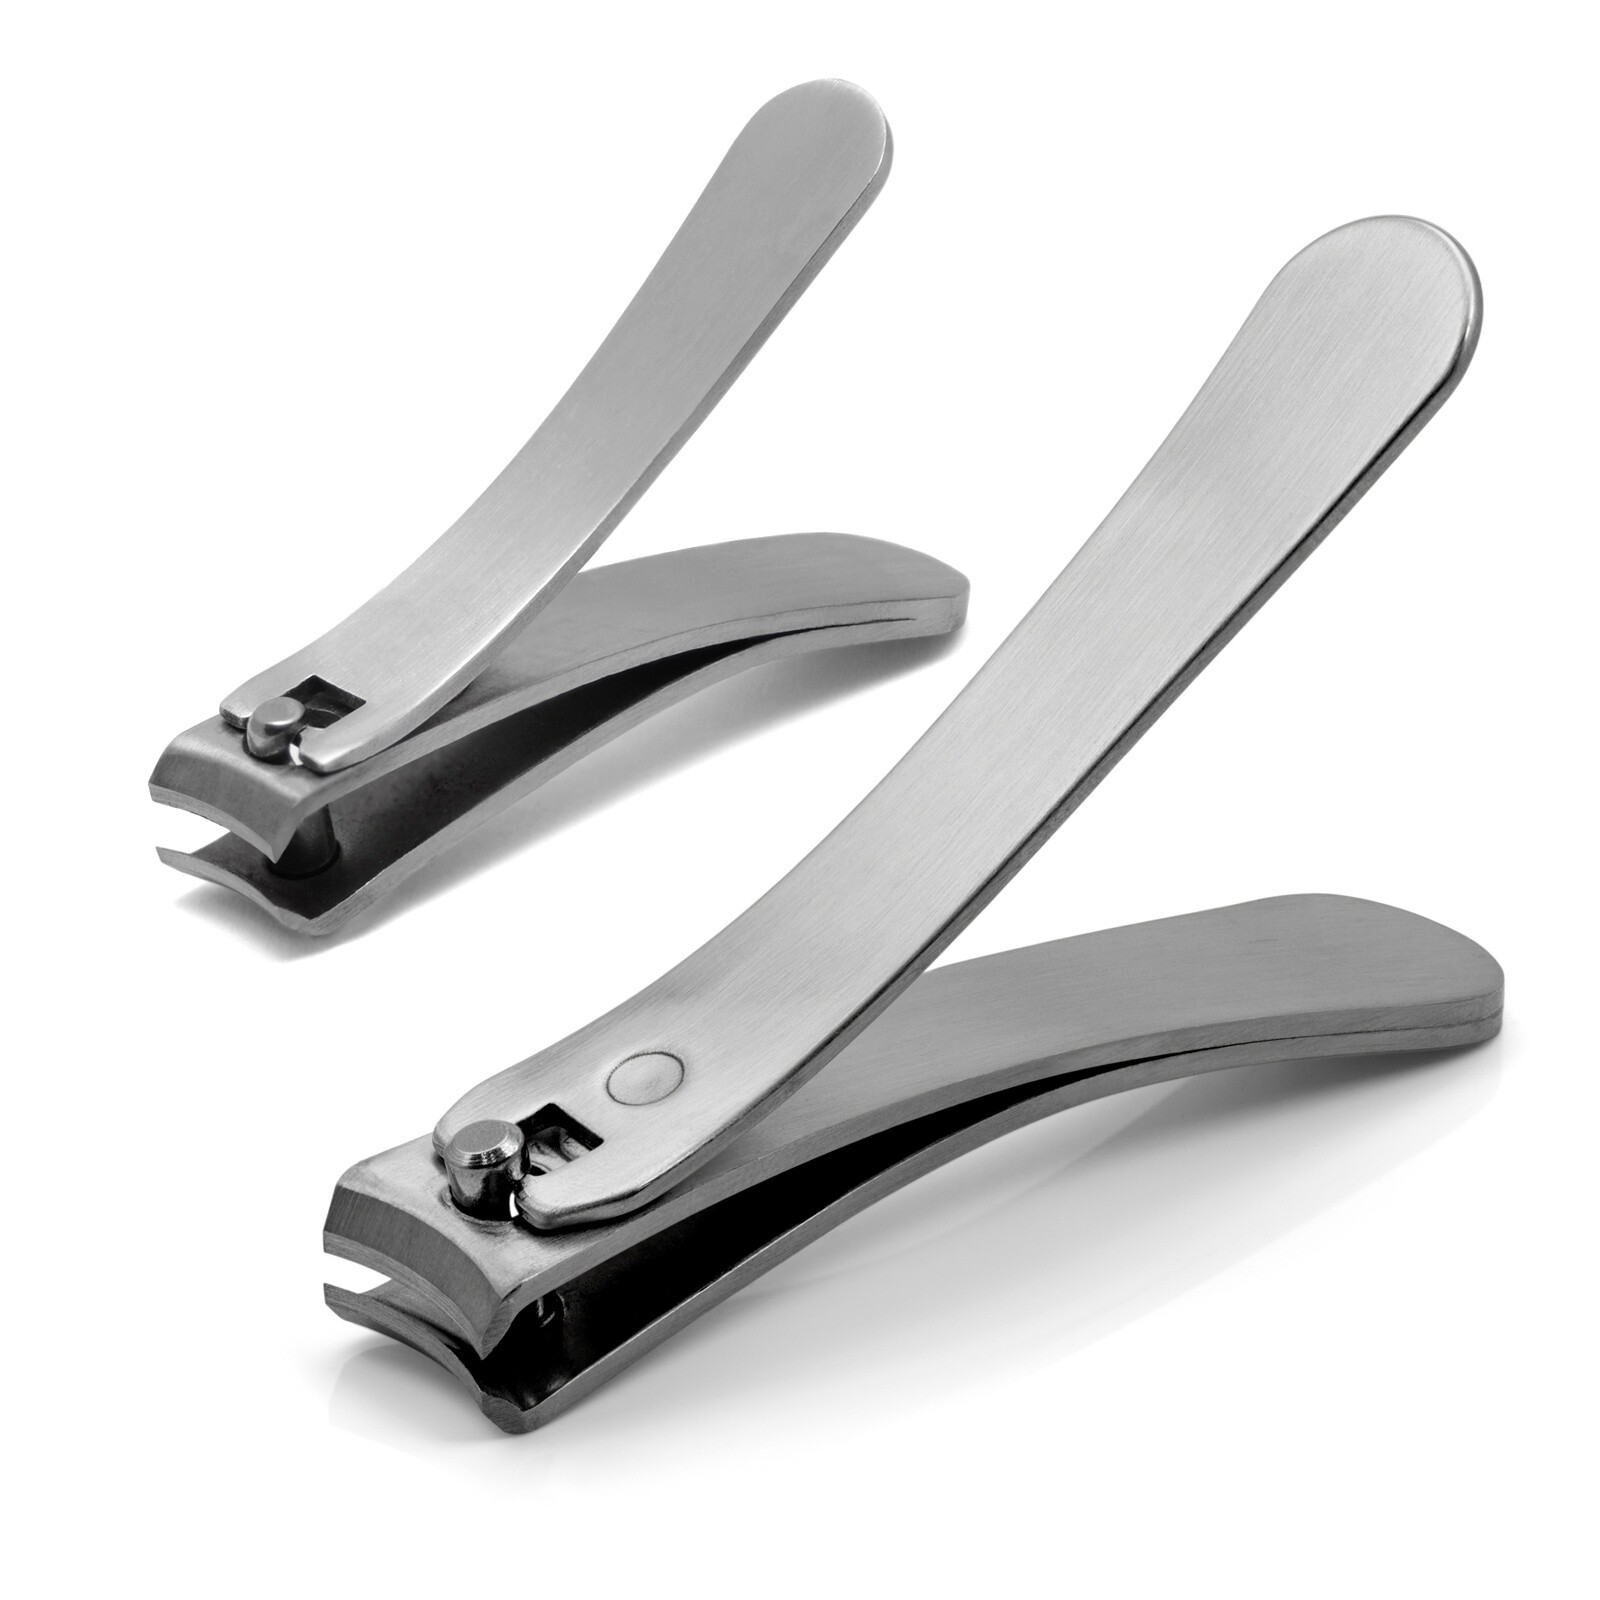 Set of 2 Nail Clippers - Mont bleu Store - Made from stainless steel